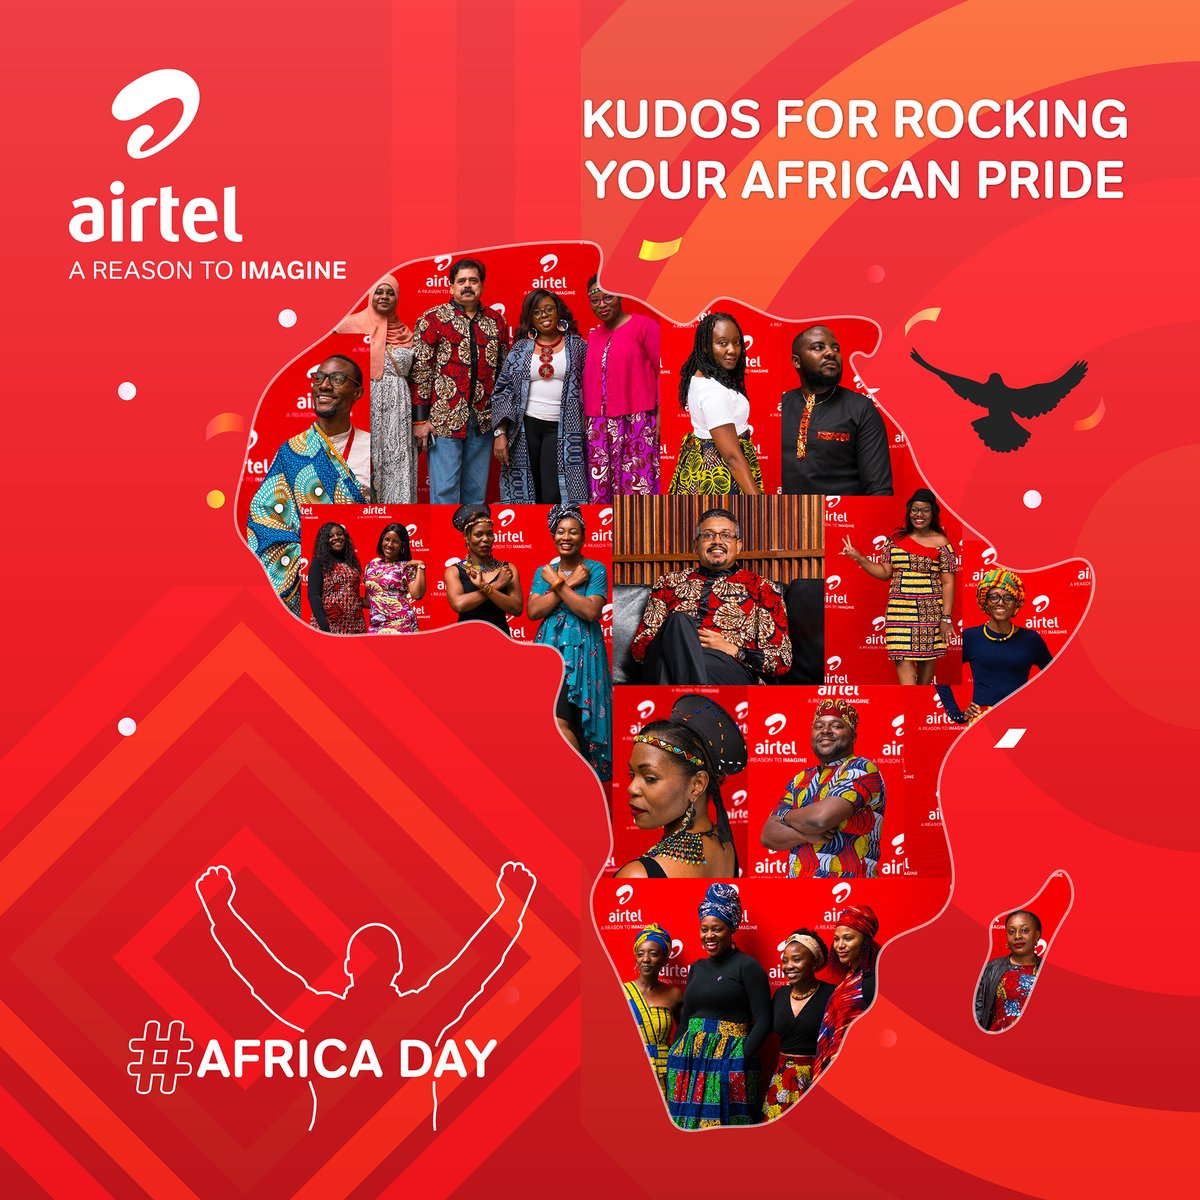 Airtel staff paid homage to Africa’s rich heritage by dressing up as iconic figures who have shaped our continent’s history. Let’s celebrate Africa Day together!
#AfricaDay #AfricanHeritage